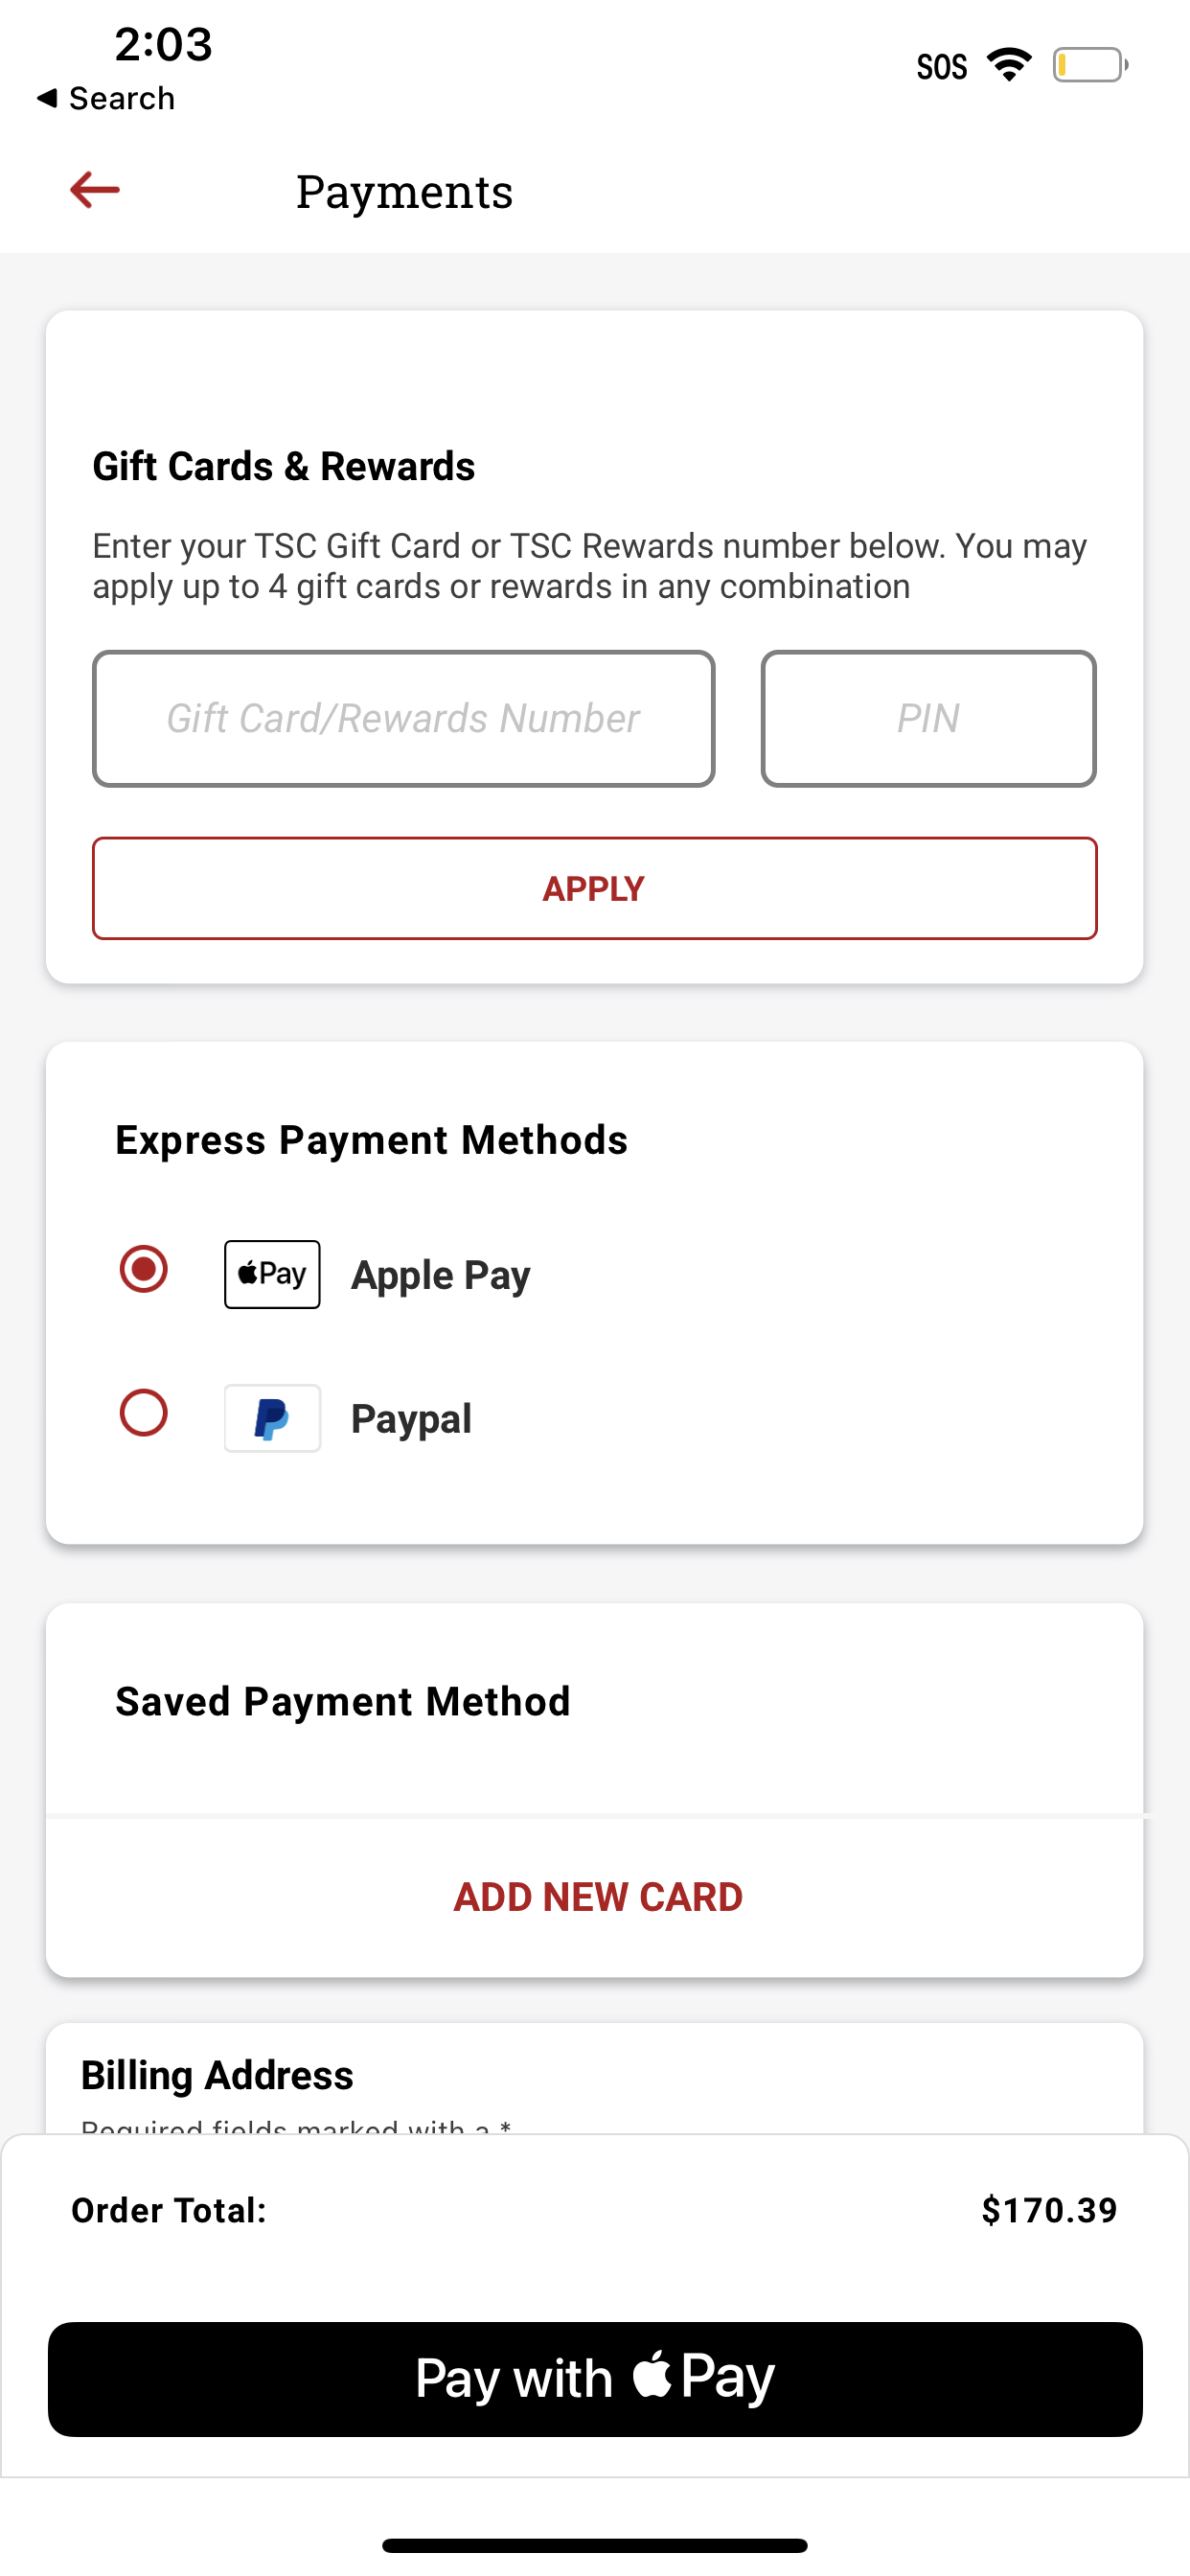 Tractor Supply Company accepts Apple Pay in its app.